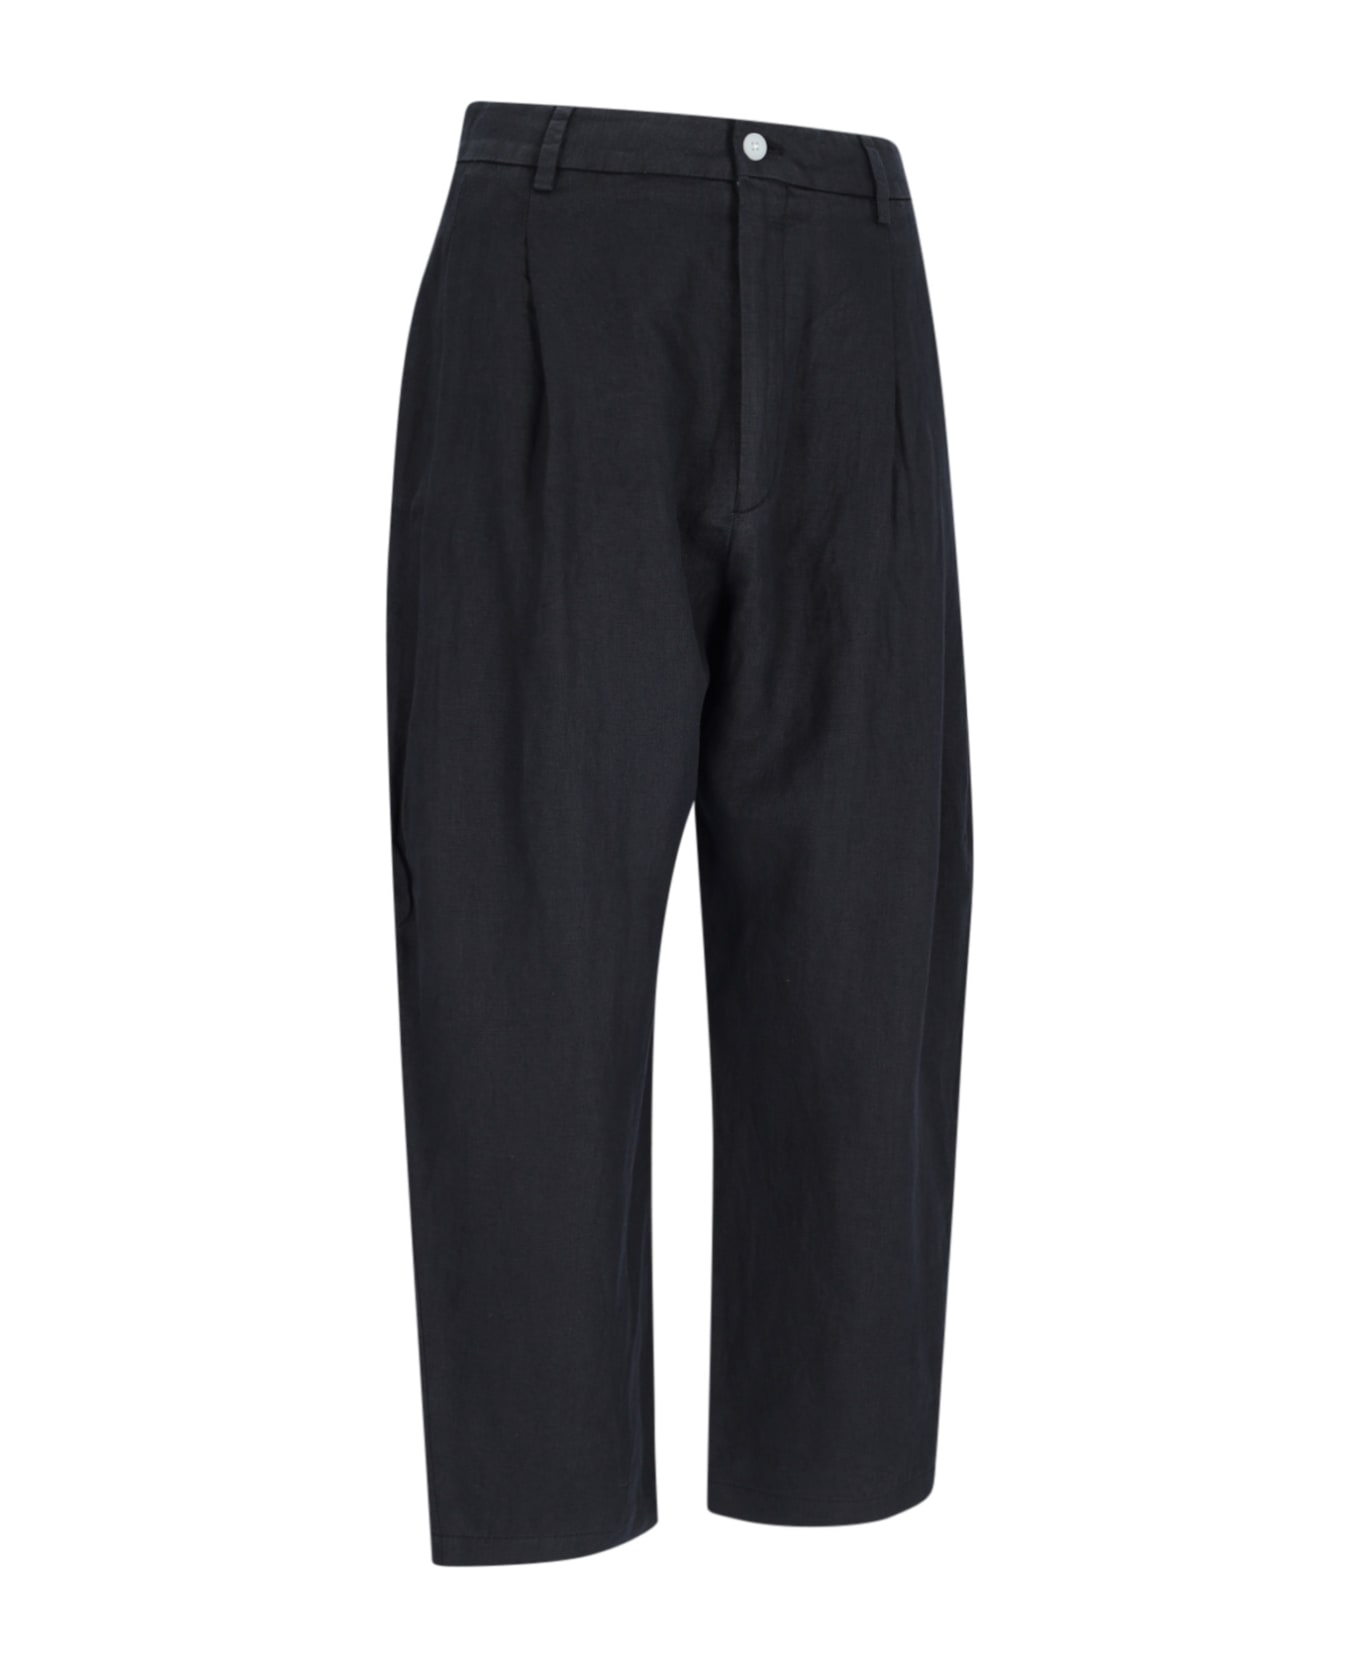 Sibel Saral Monfil Navy Trousers - Blue ボトムス